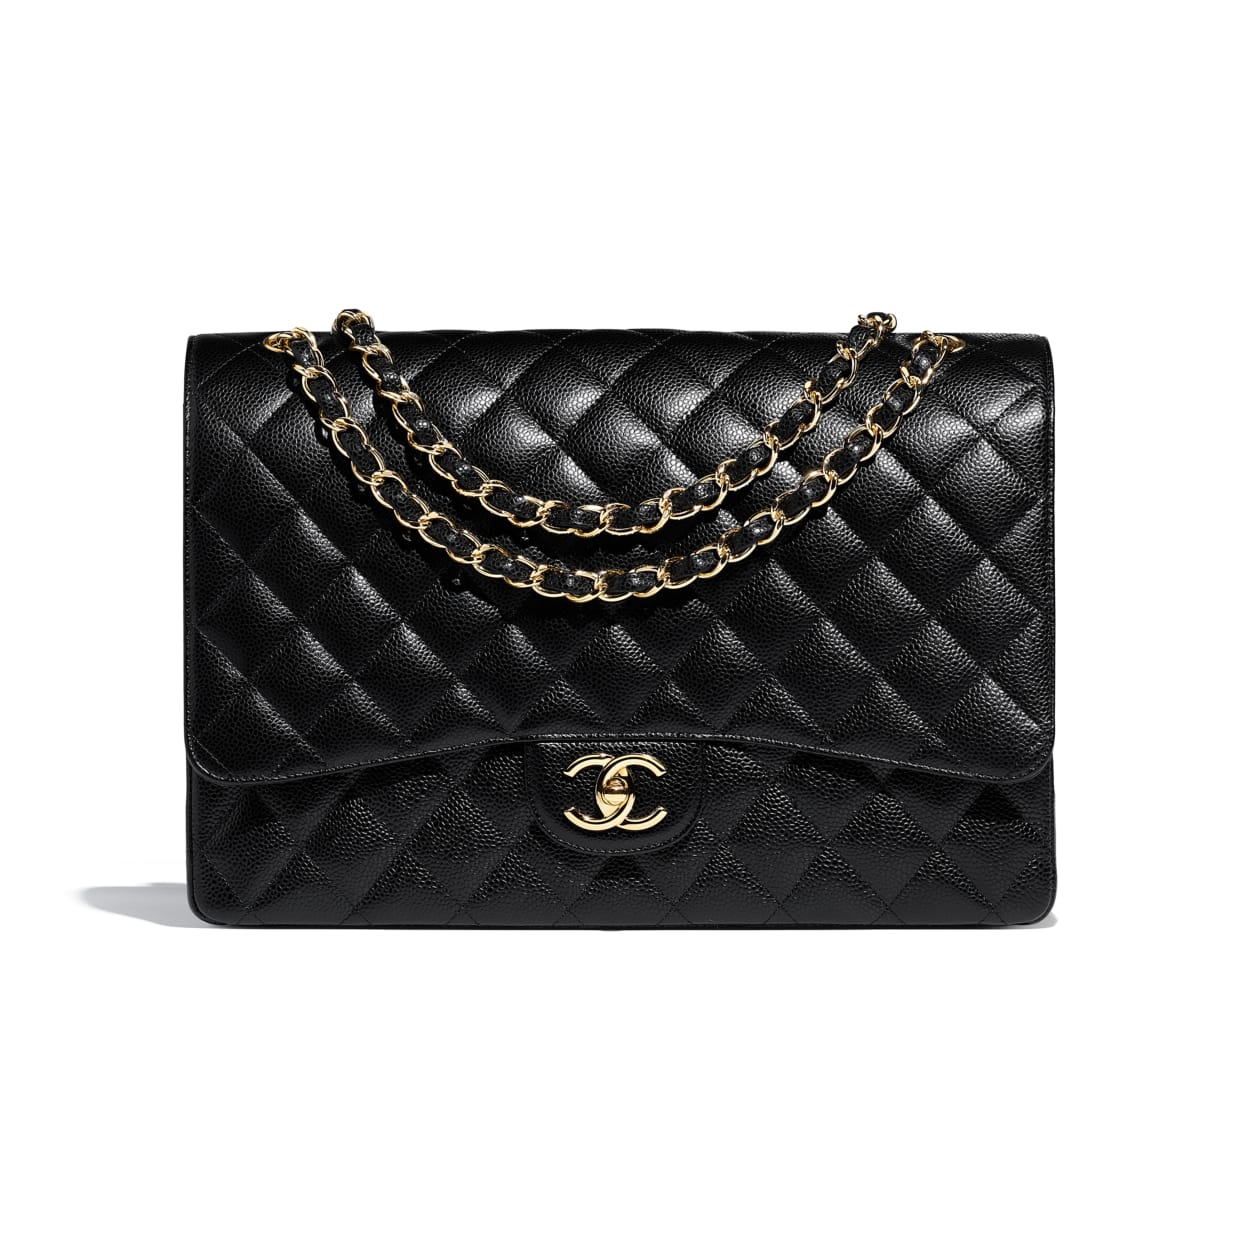 Chanel US Bag Prices Have Increased effective January 15, 2021 - Spotted  Fashion